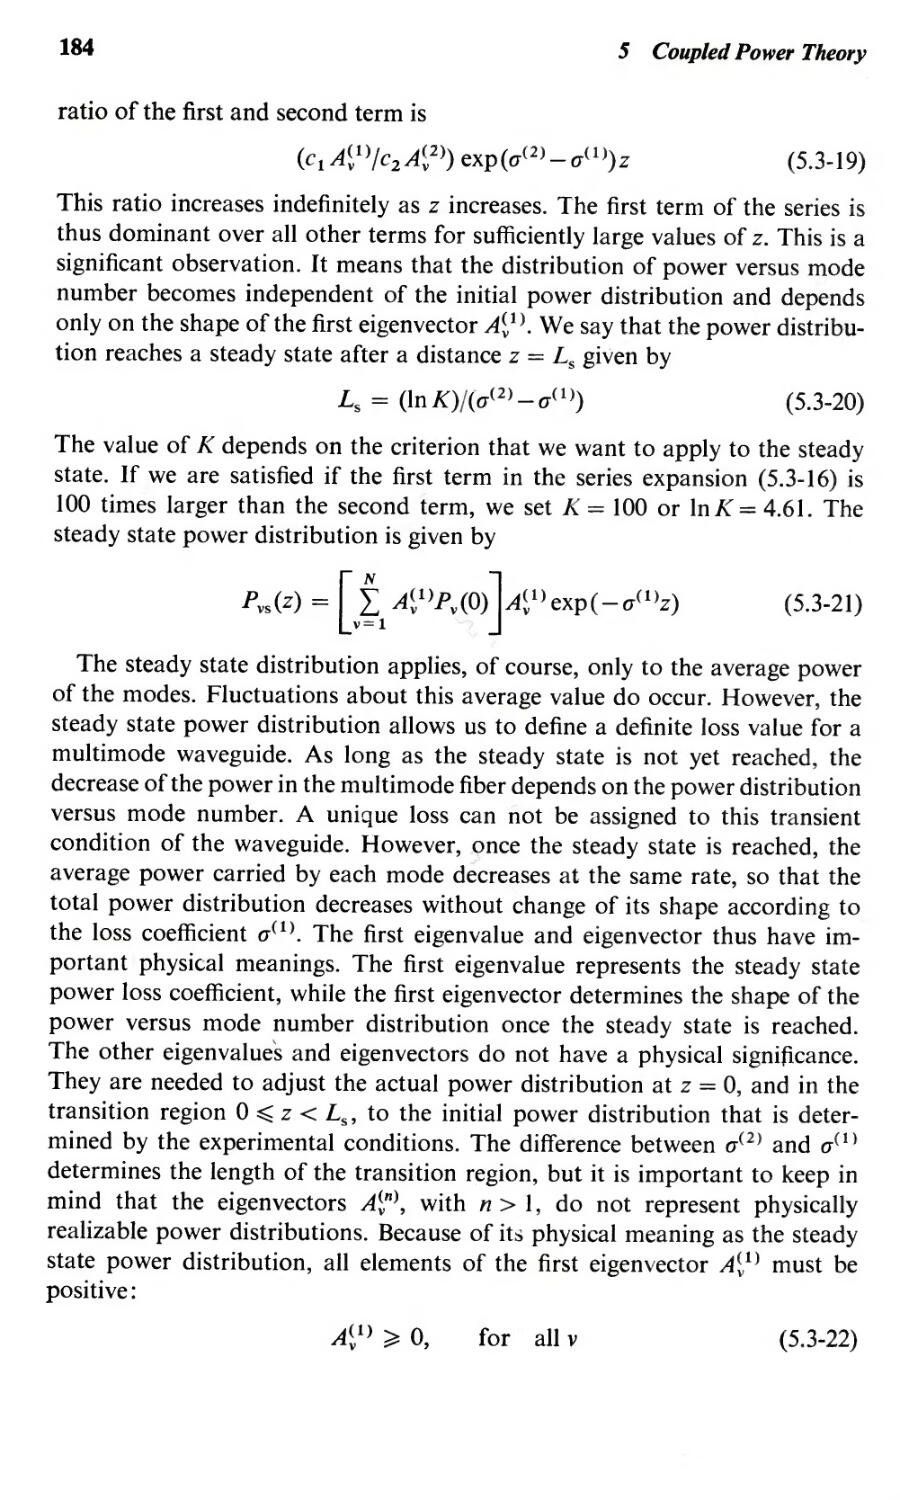 Average power, 184
Fluctuations, 184
184
--- steady state, 184
Steady state, 184
Steady state loss, 184
Steady state power distribution, 184